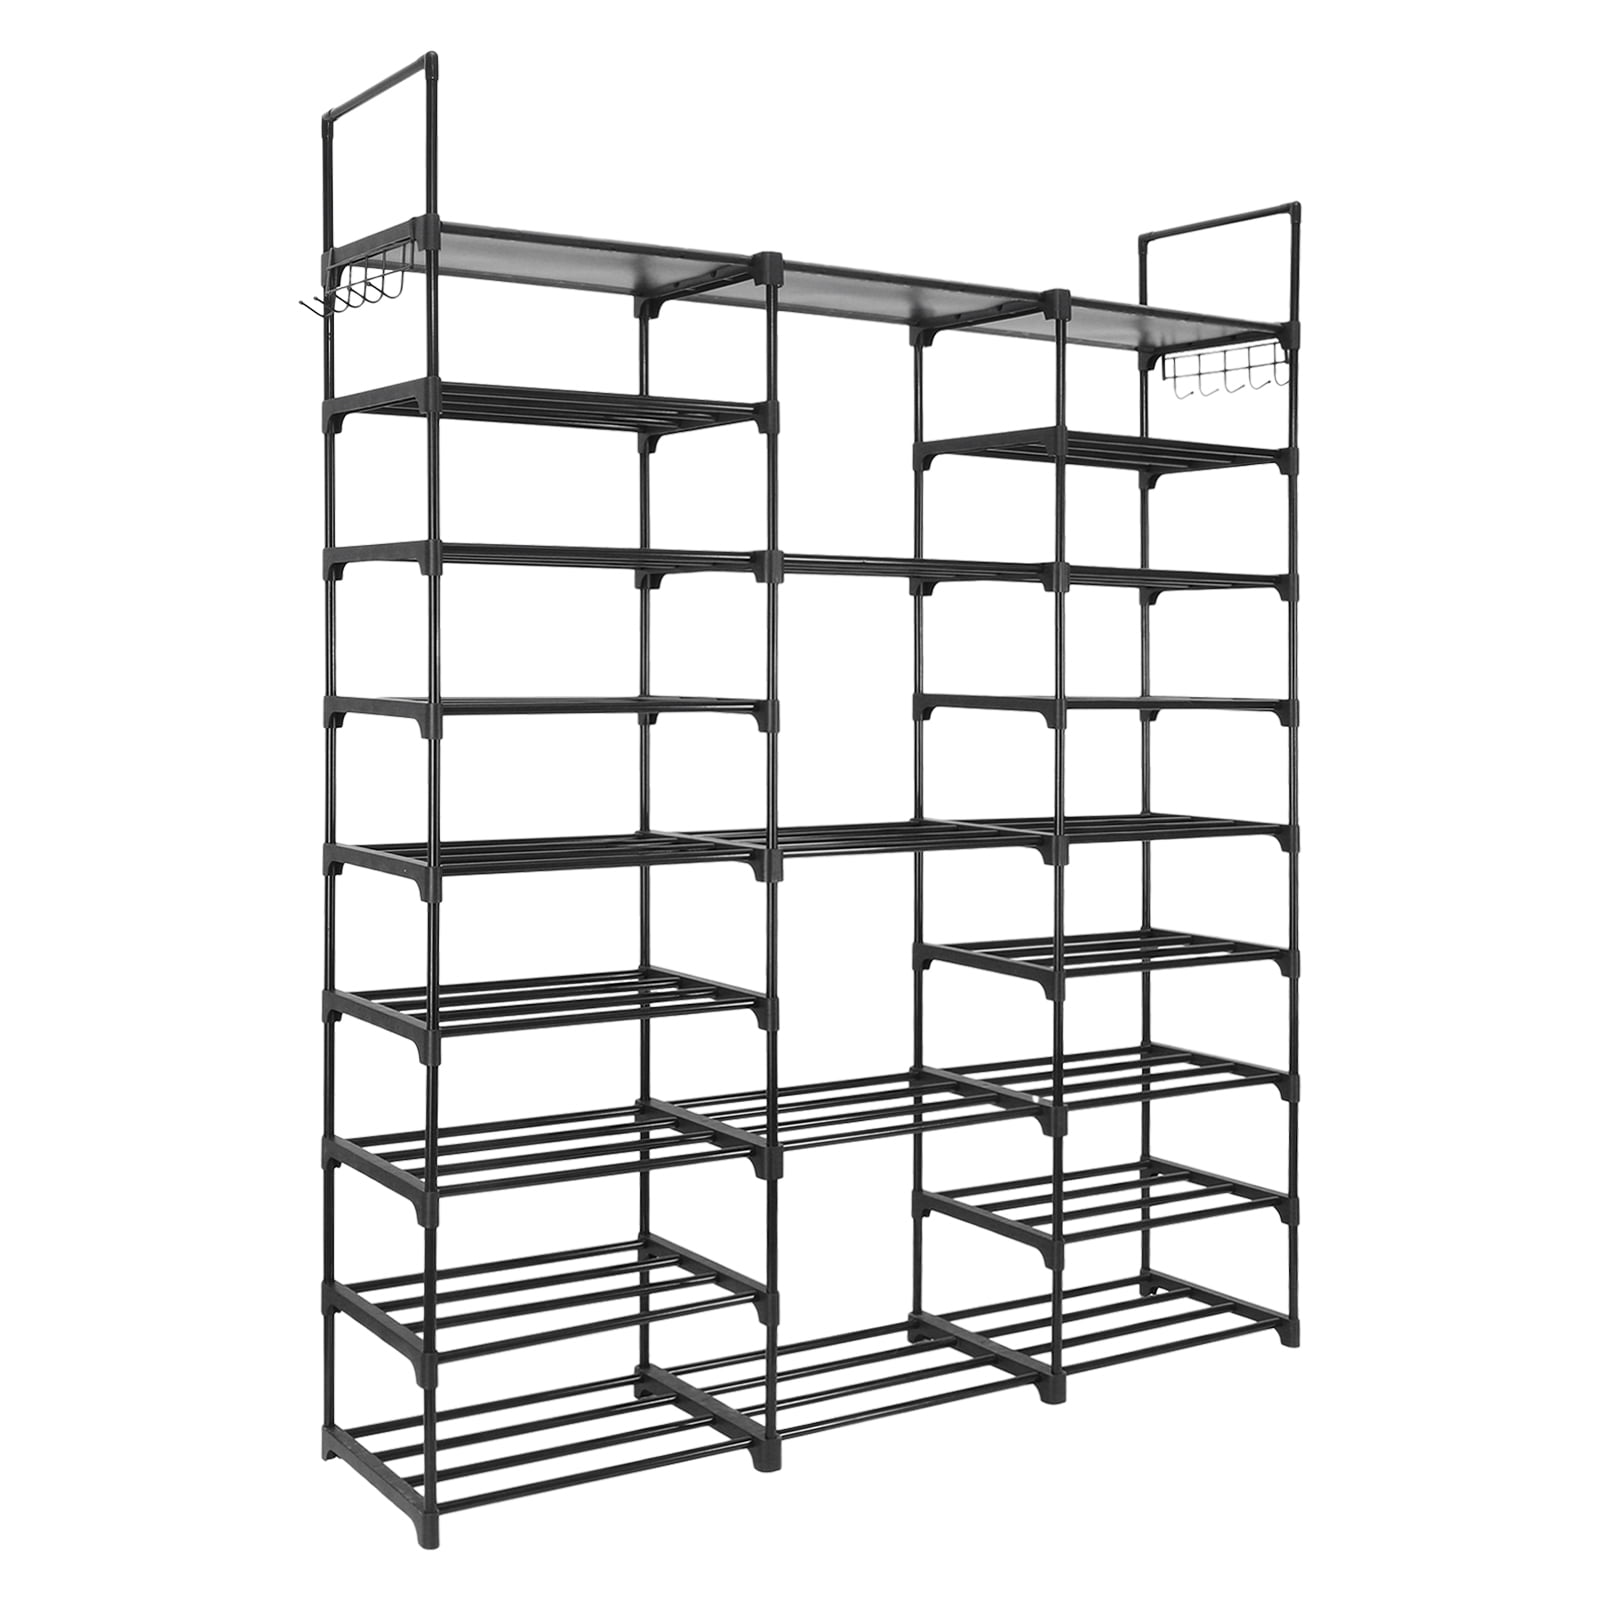 HEQUSIGNS 9 Tiers Metal Shoe Rack Organizer, Large-Capacity of 50-55 ...